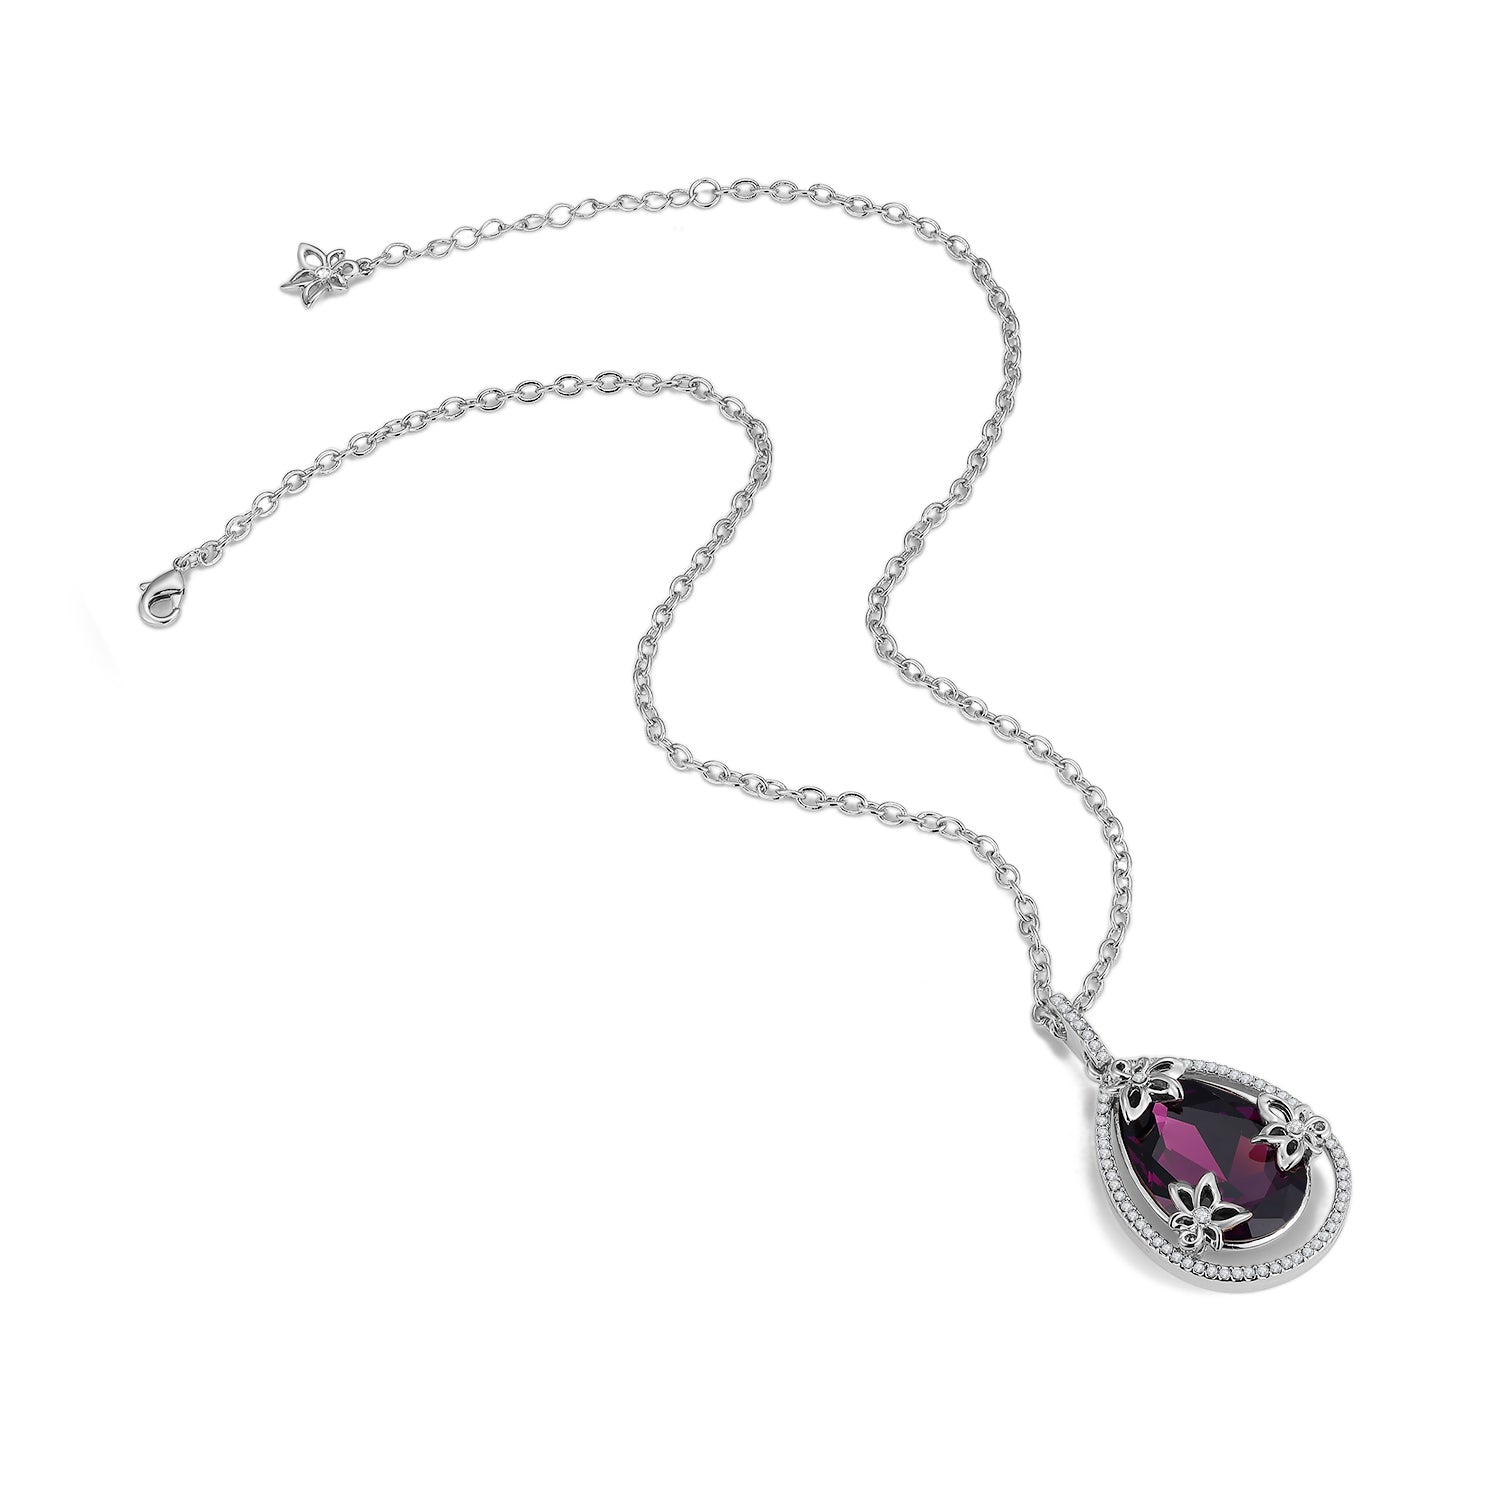 Lucky VICACCI Mermaid Tears Pendant Necklace with Swarovski Crystals